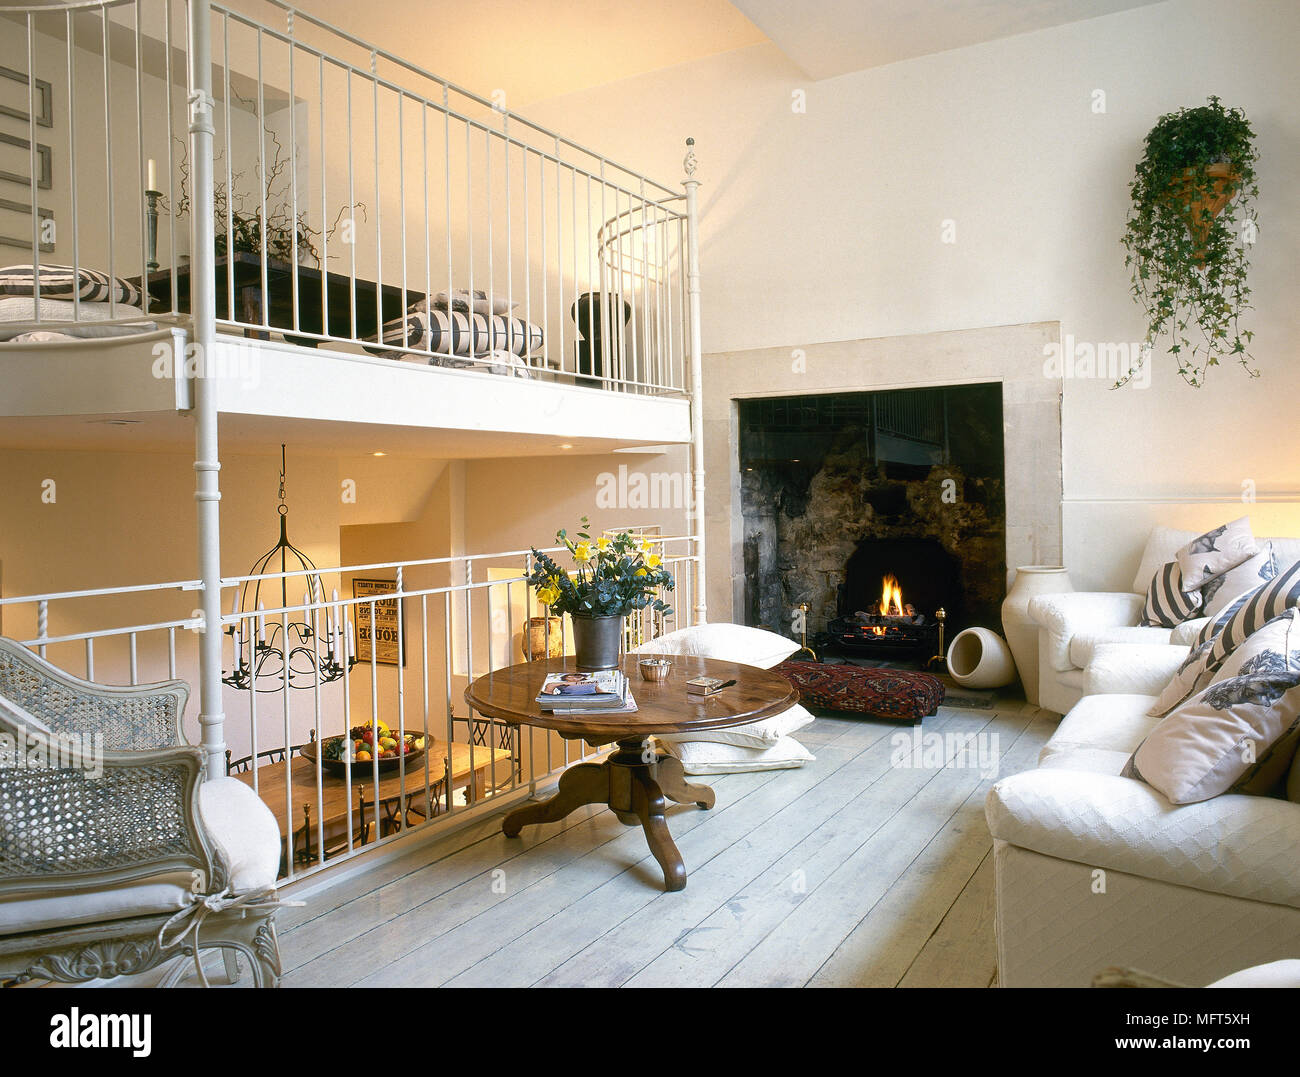 A Traditional White Sitting Room With Split Level Balconies